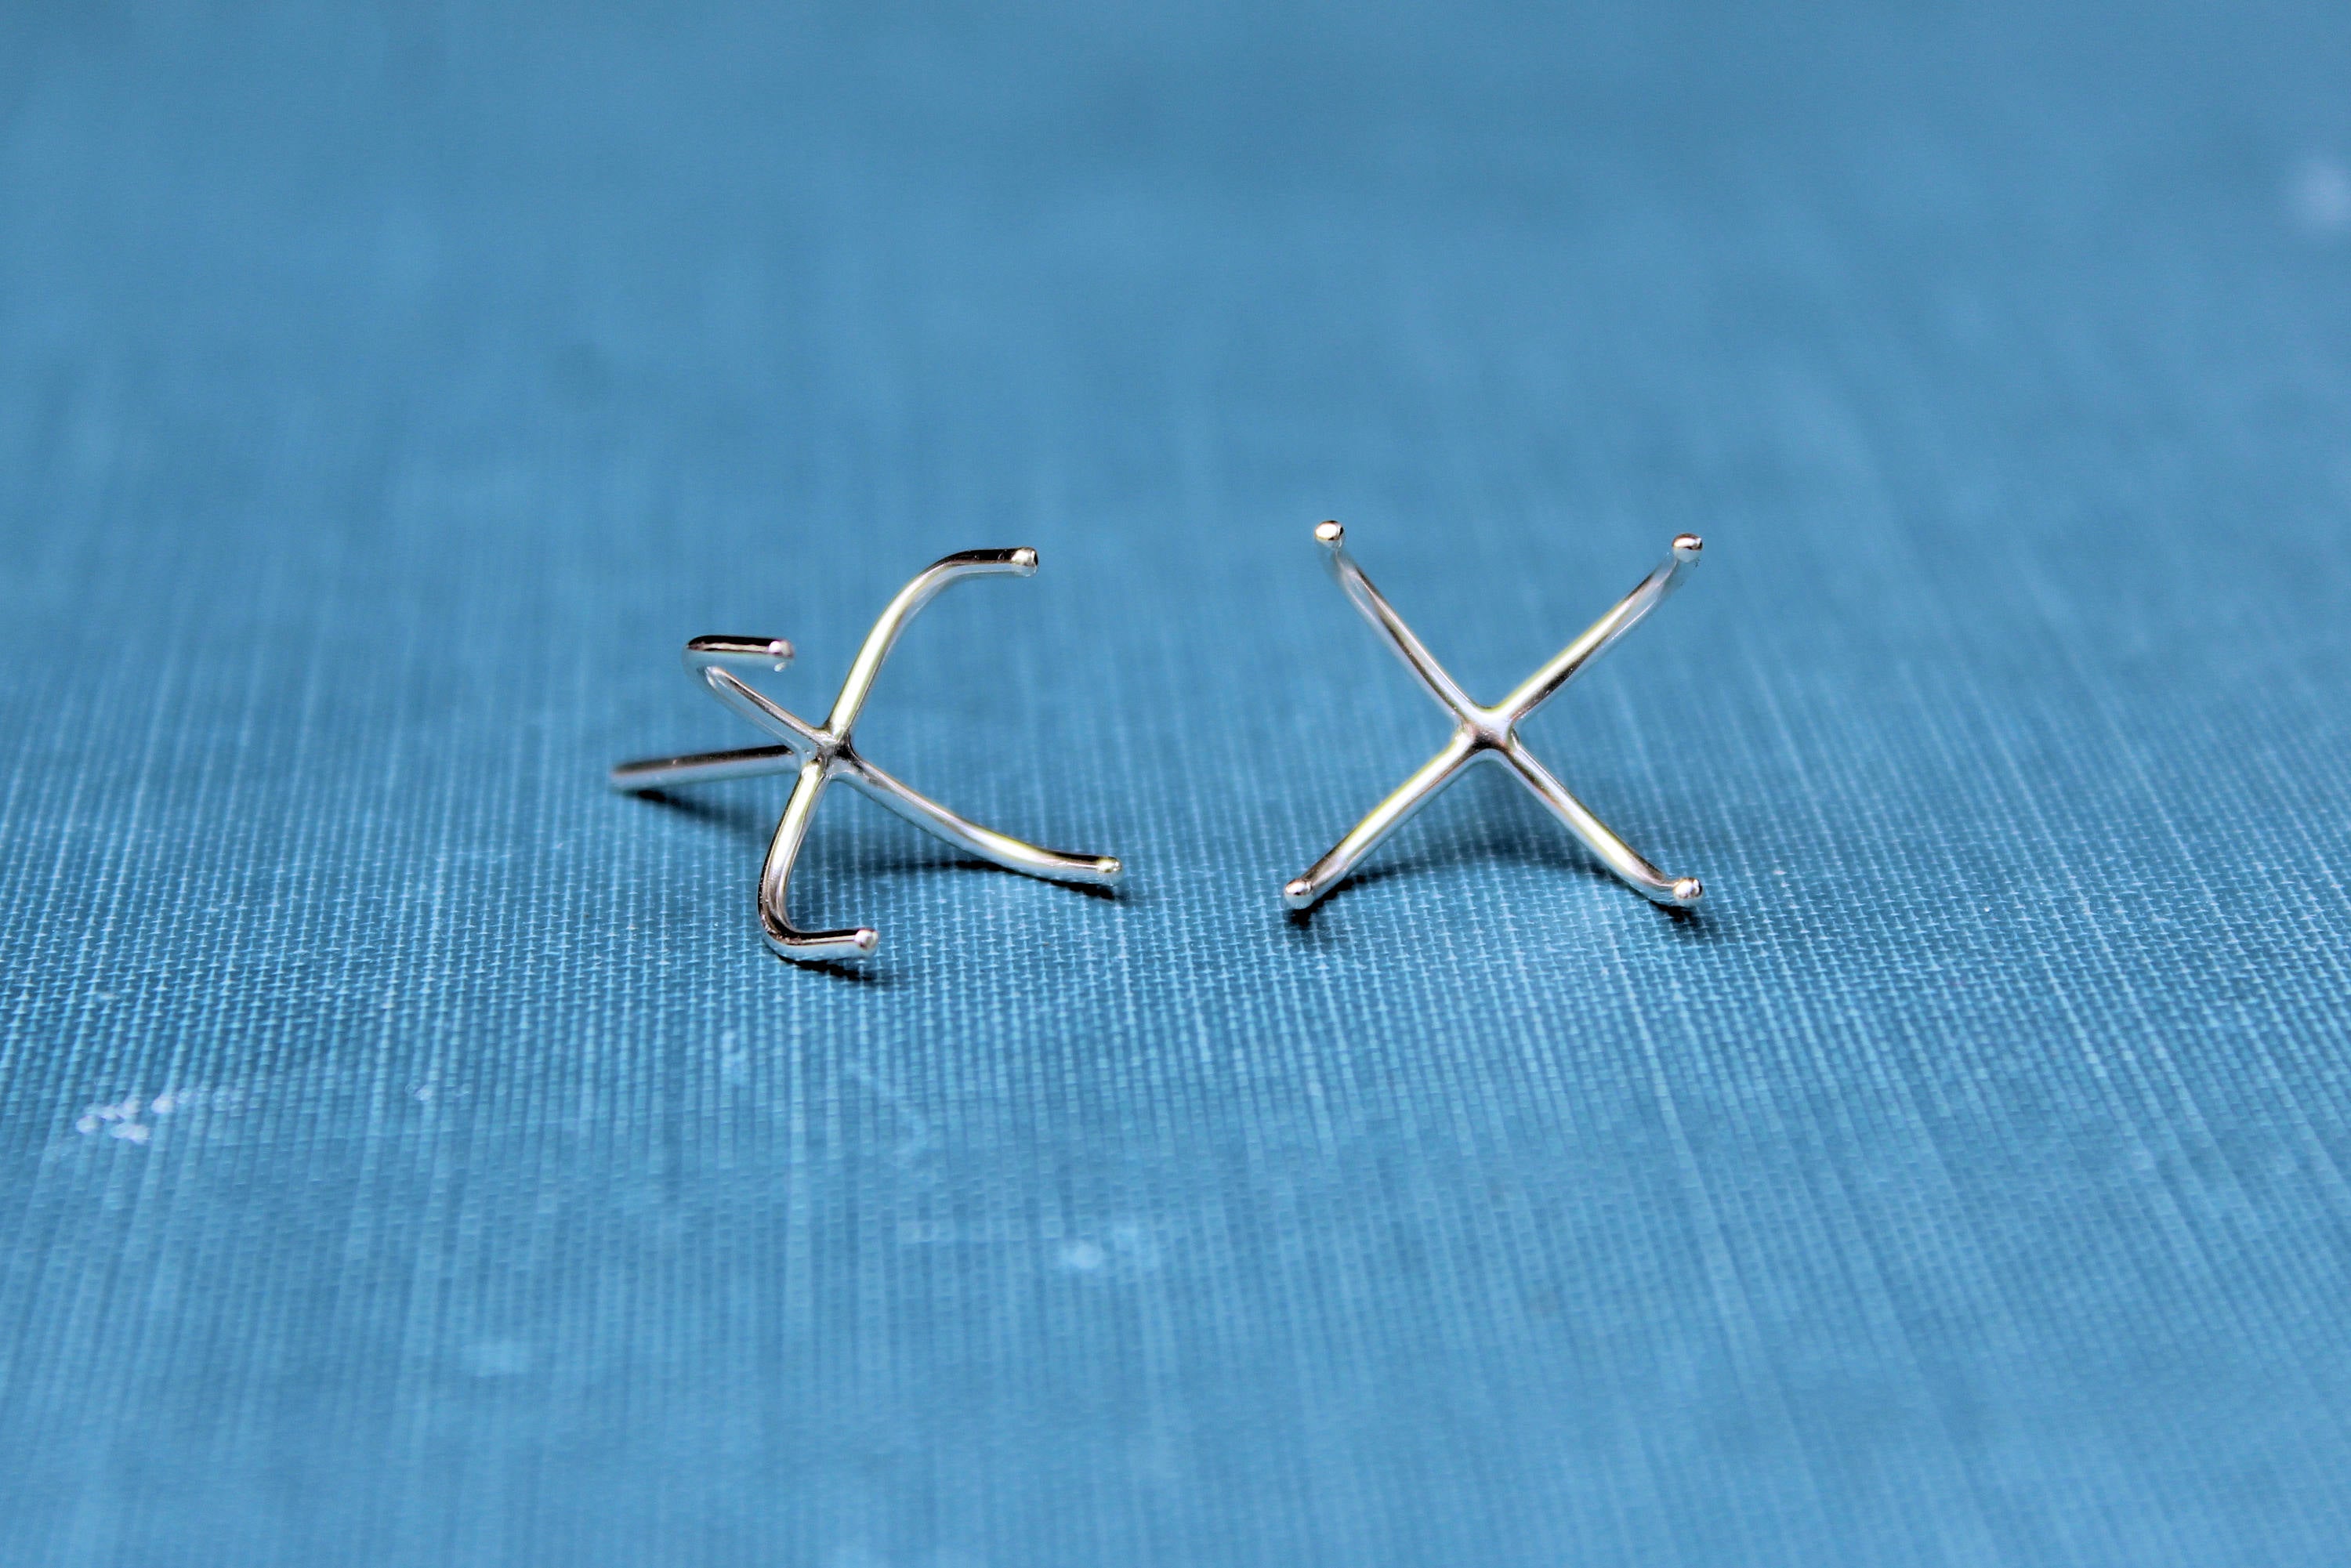 Silver Claw Prong Raw Stone Stud Earring Blanks, 4 Prong Setting, Wholesale Blanks, Raw Stones, DIY Jewelry, Silver Blanks, Jewelry Supplies